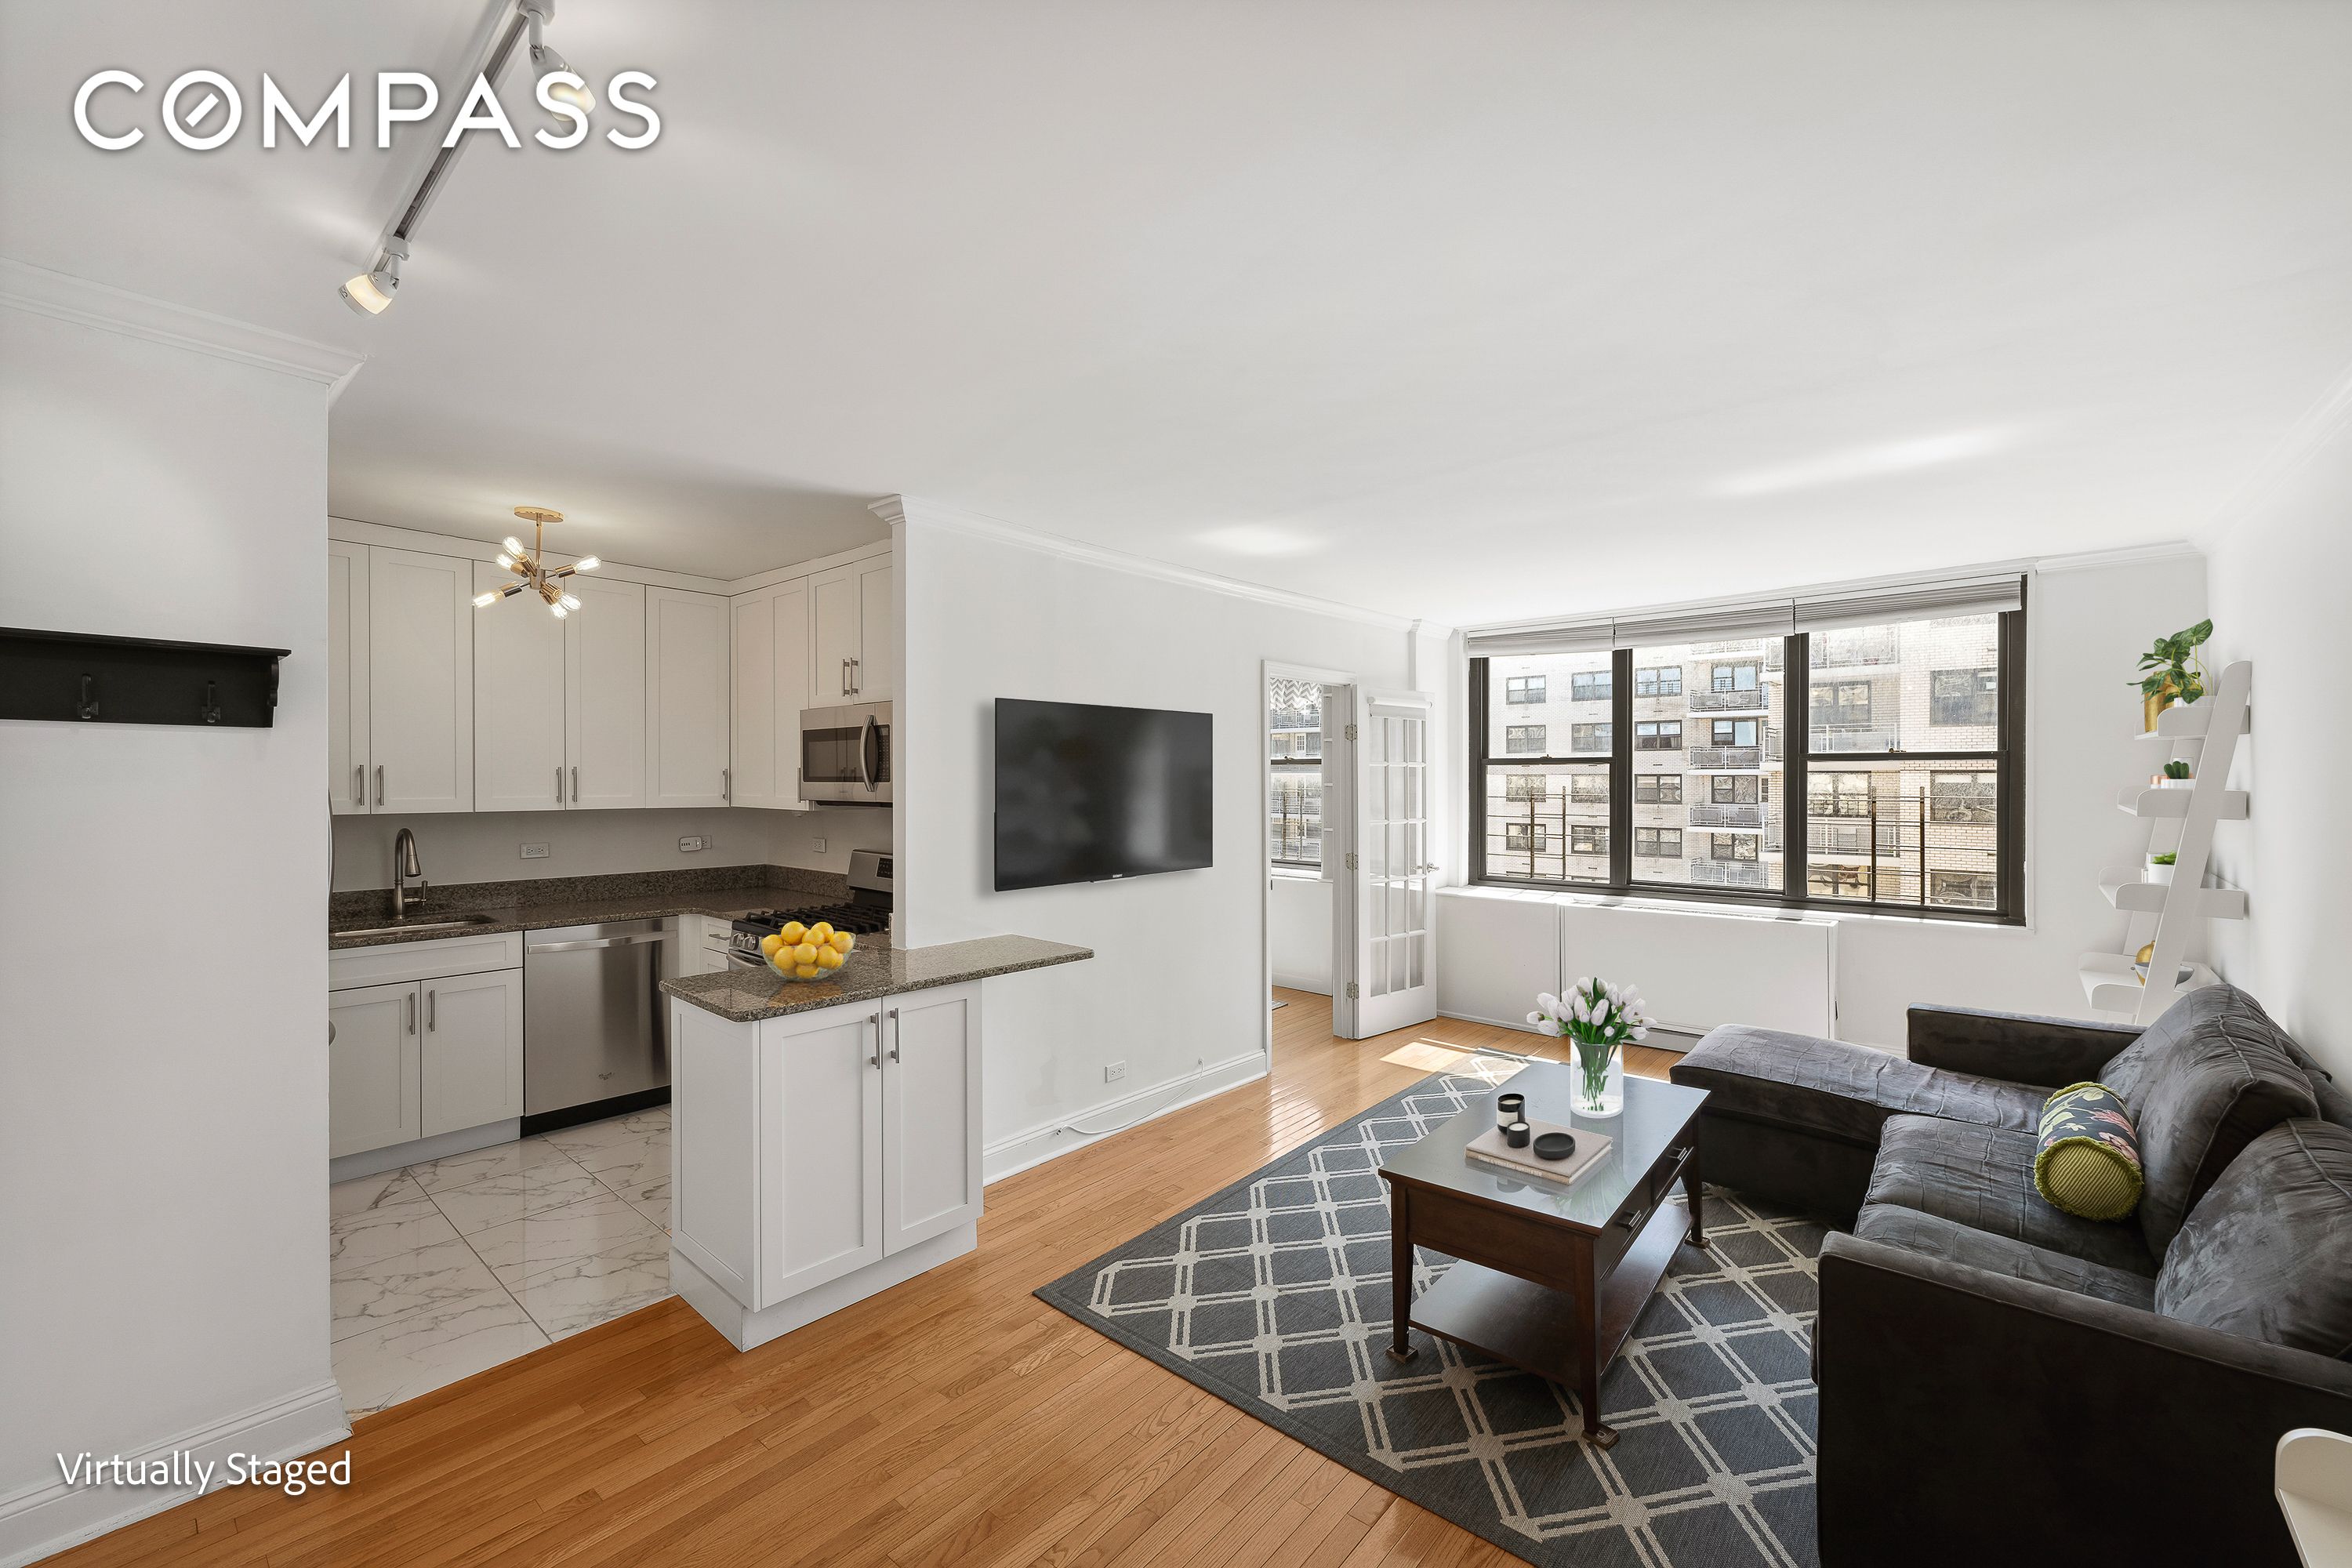 301 East 87th Street 16E, Upper East Side, Upper East Side, NYC - 2 Bedrooms  
1 Bathrooms  
4 Rooms - 